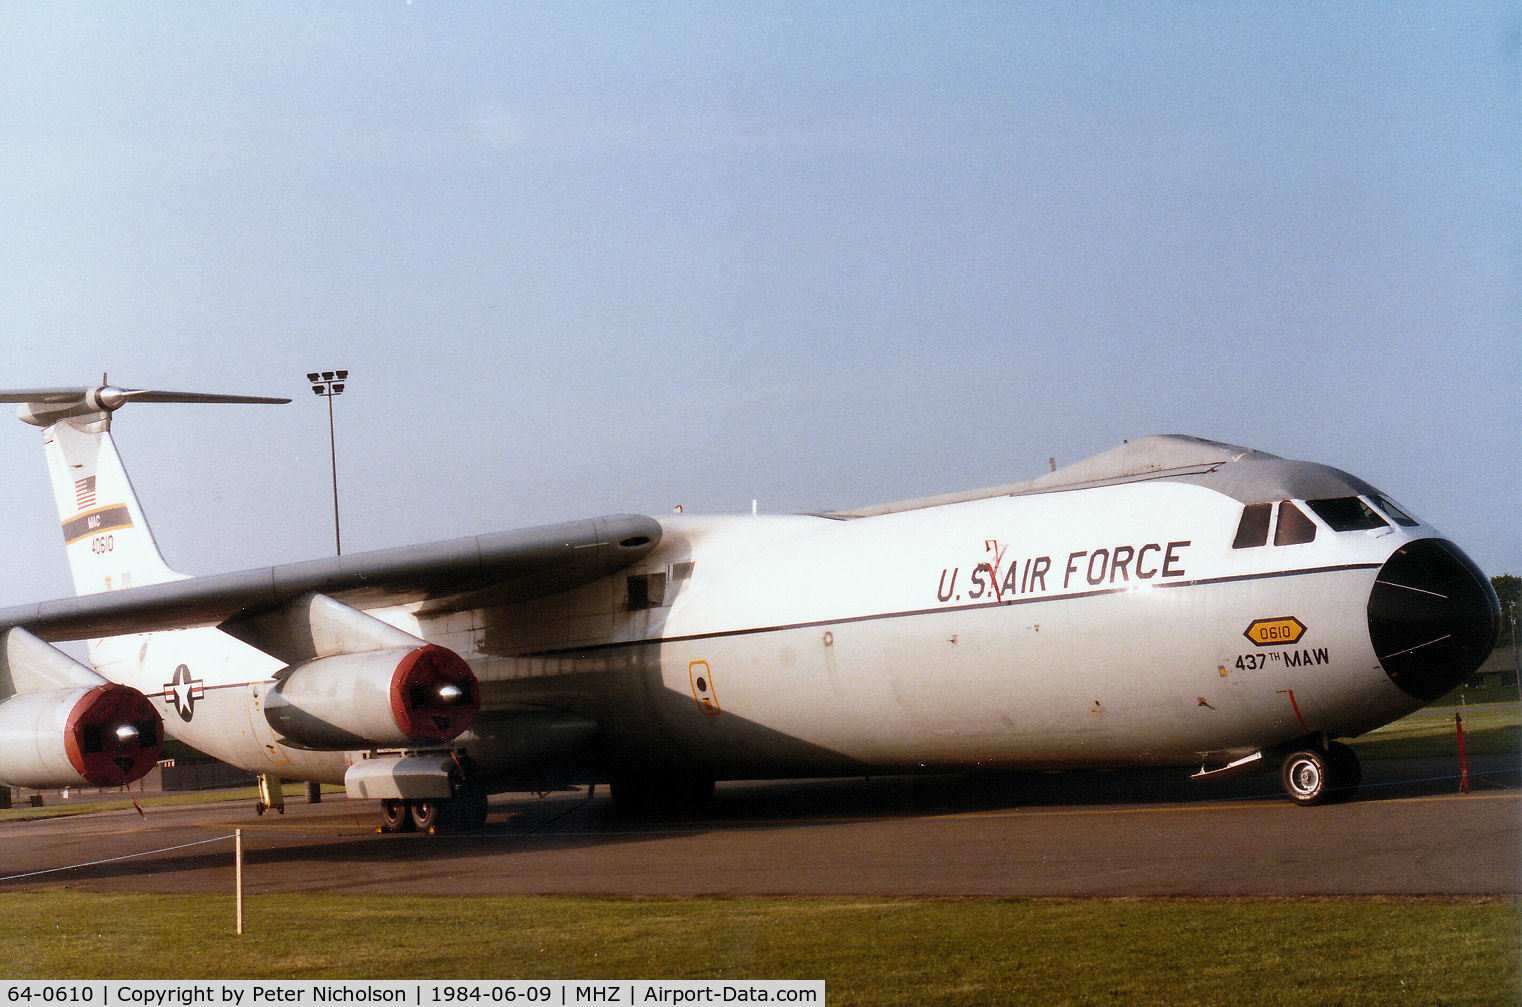 64-0610, 1964 Lockheed C-141A Starlifter C/N 300-6023, C-141A Starlifter of 437th Military Airlift Wing at Charleston AFB on display at the 1984 RAF Mildenhall Air Fete.